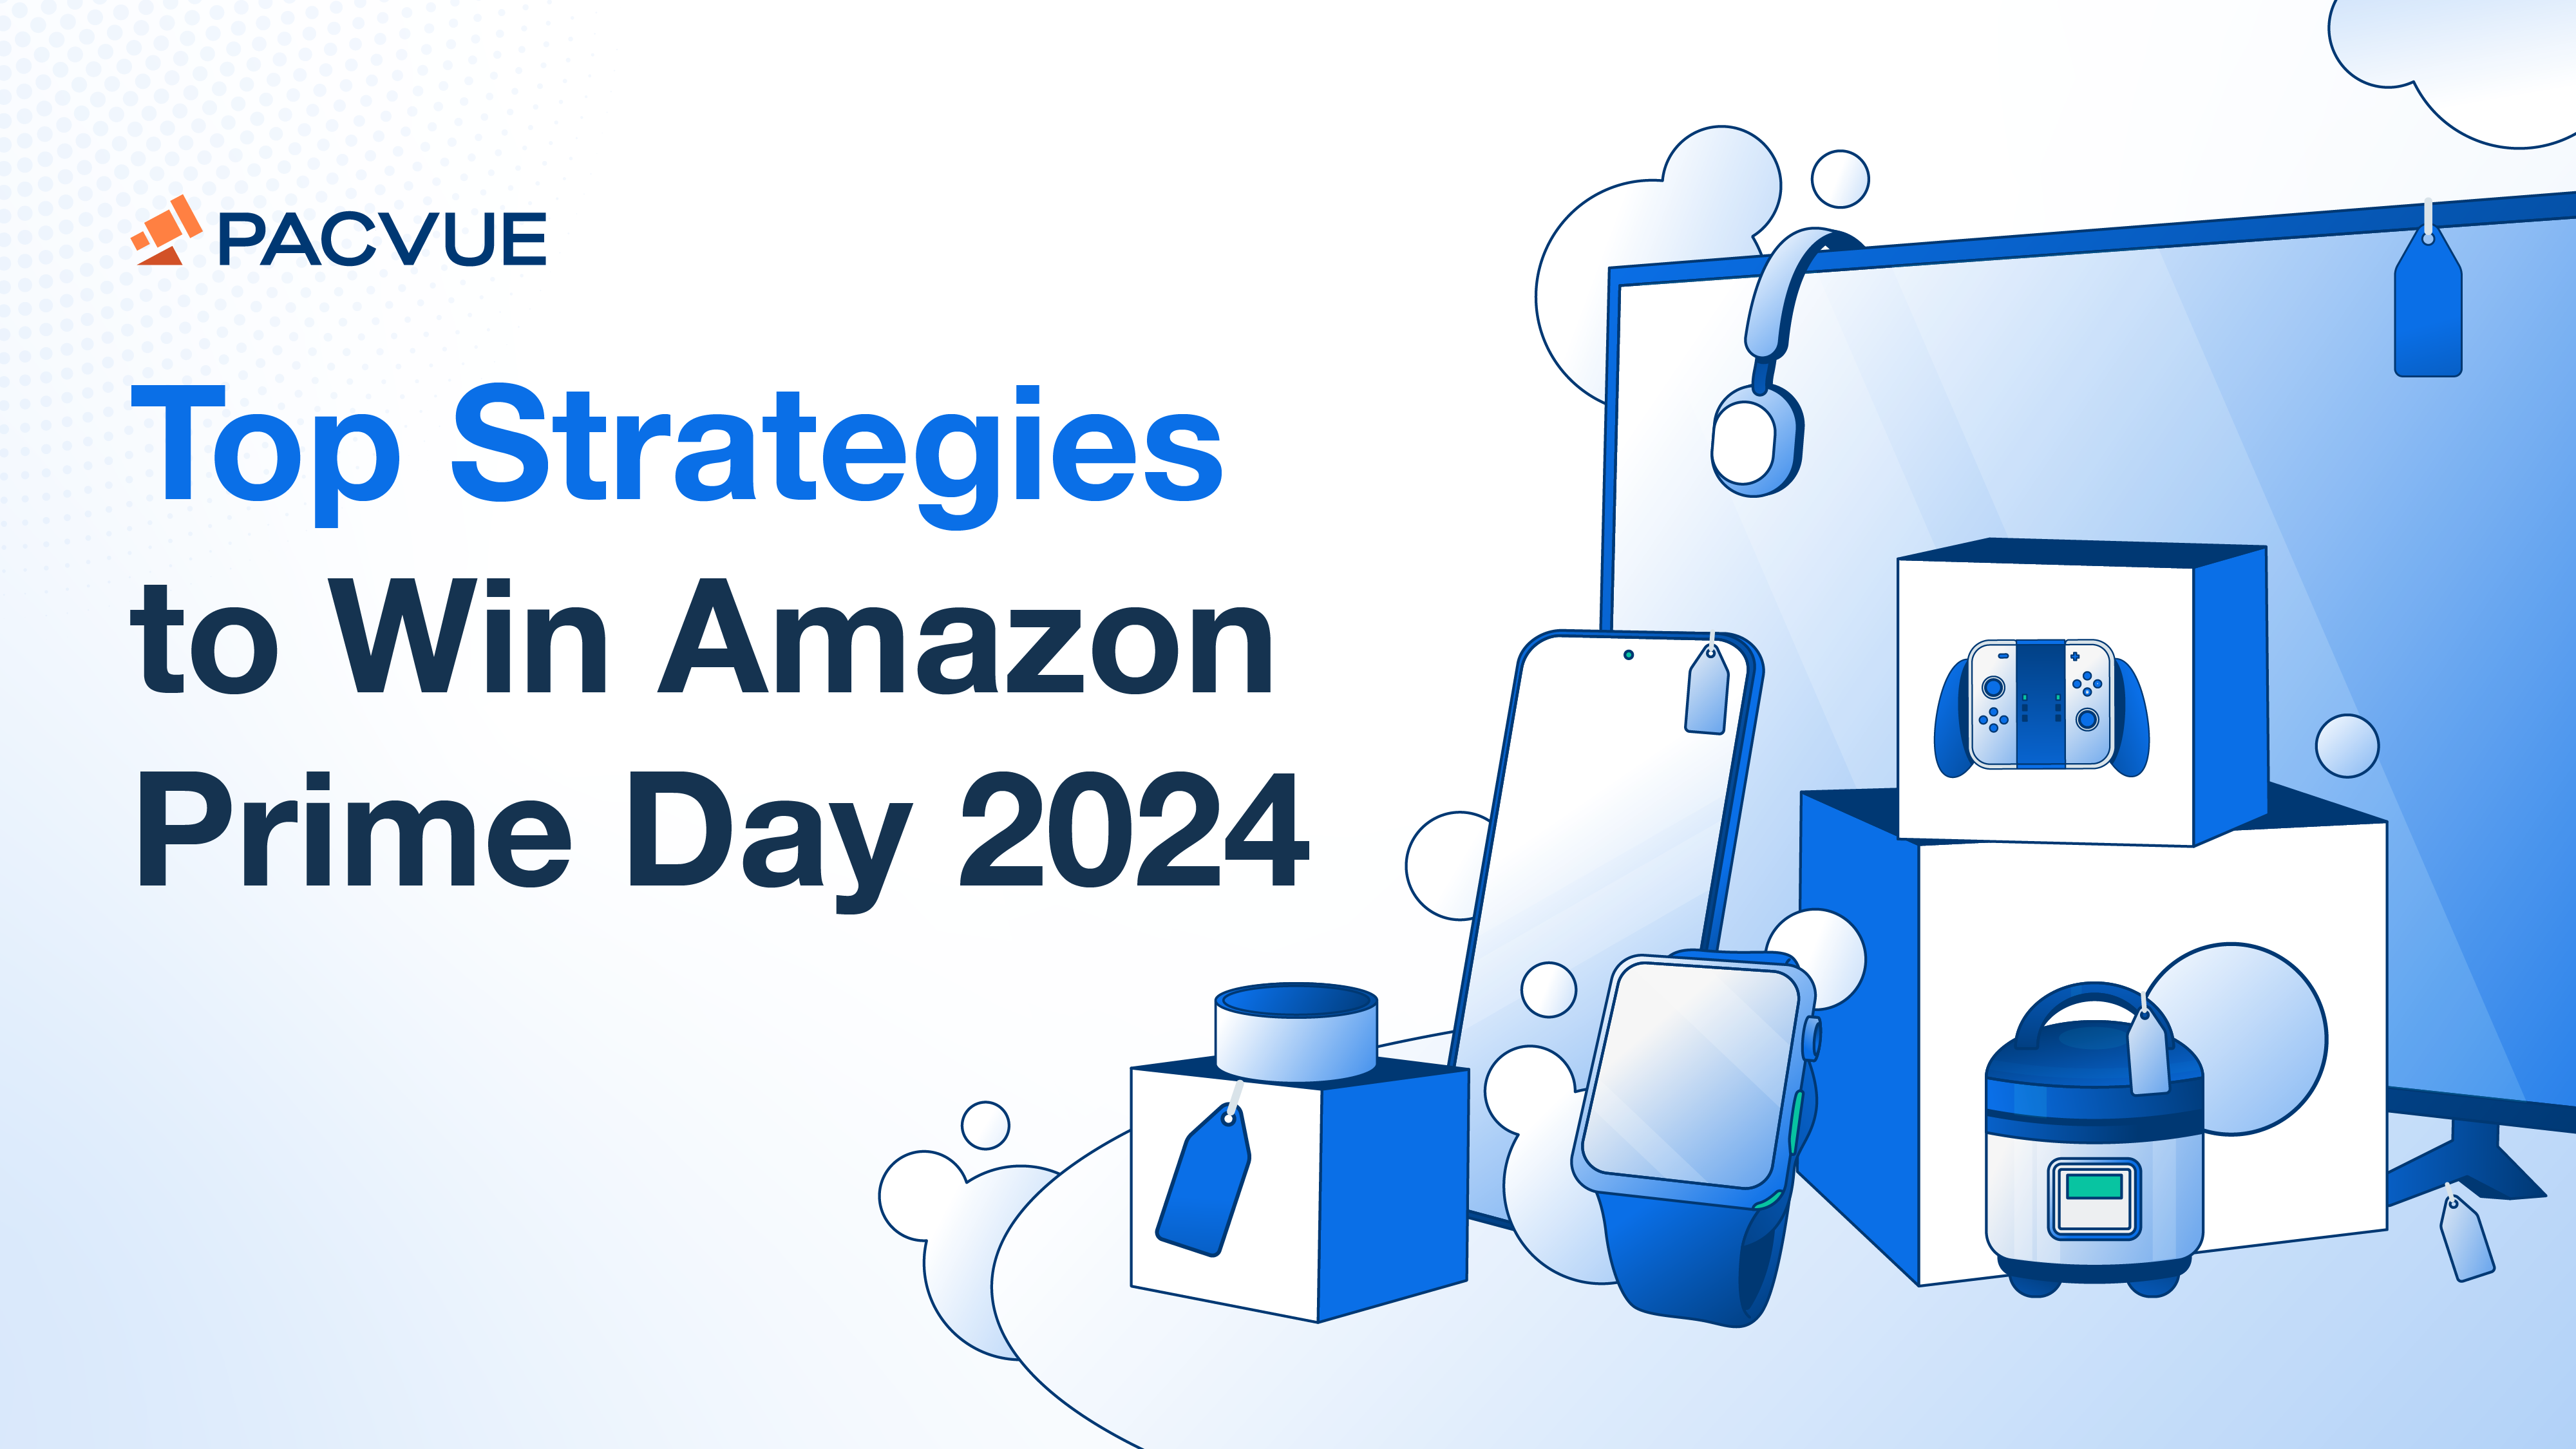 Top Strategies to Win Amazon Prime Day 2024 